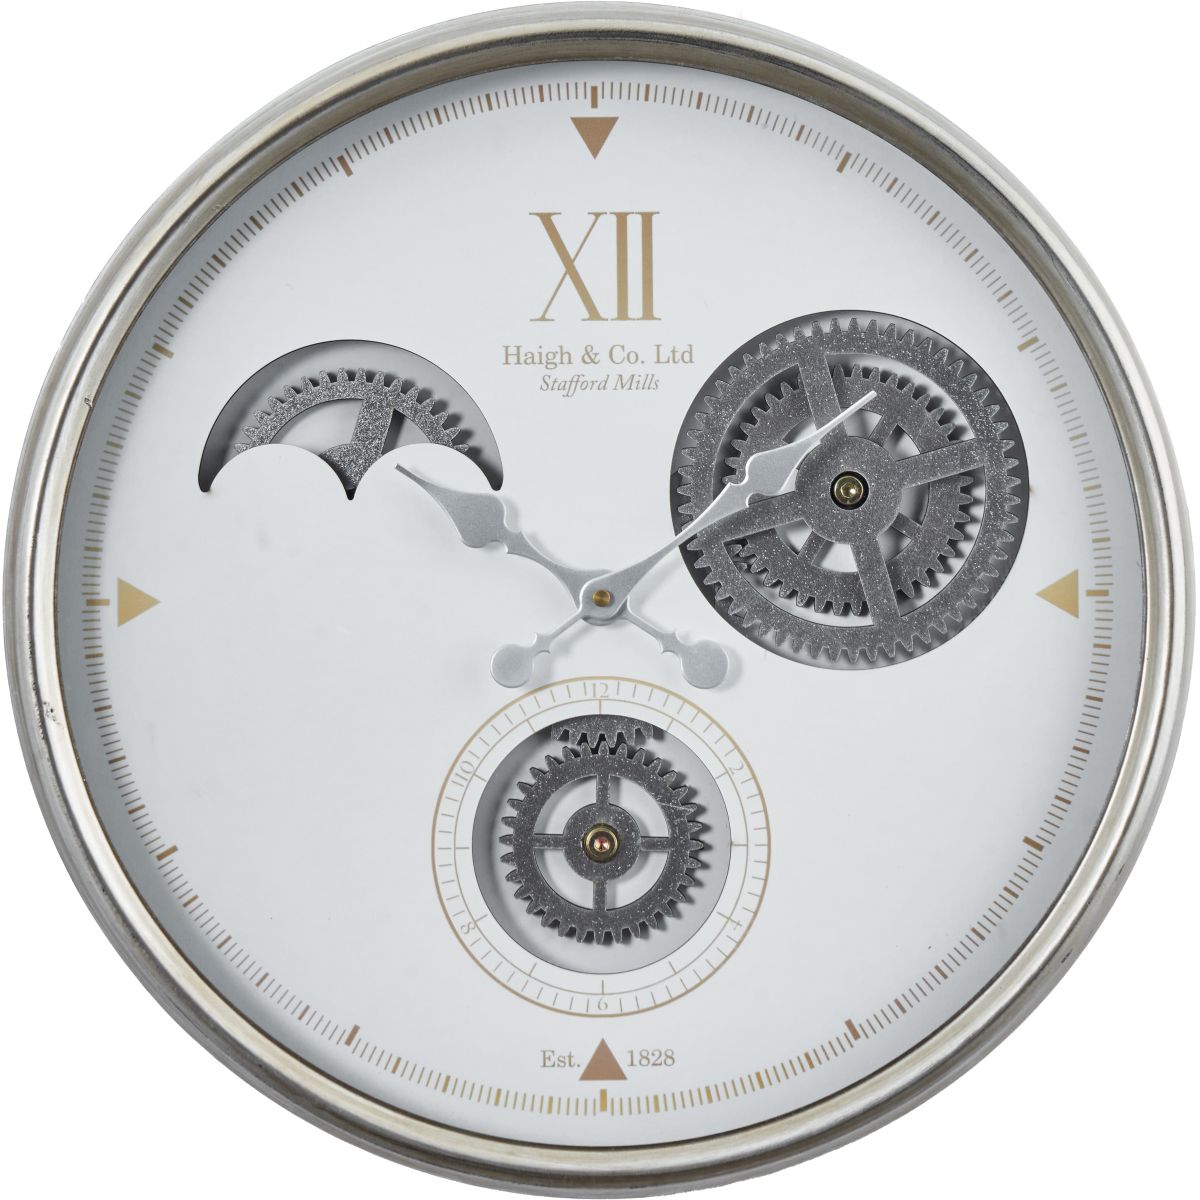 White and Silver Metal Cogs Wall Clock